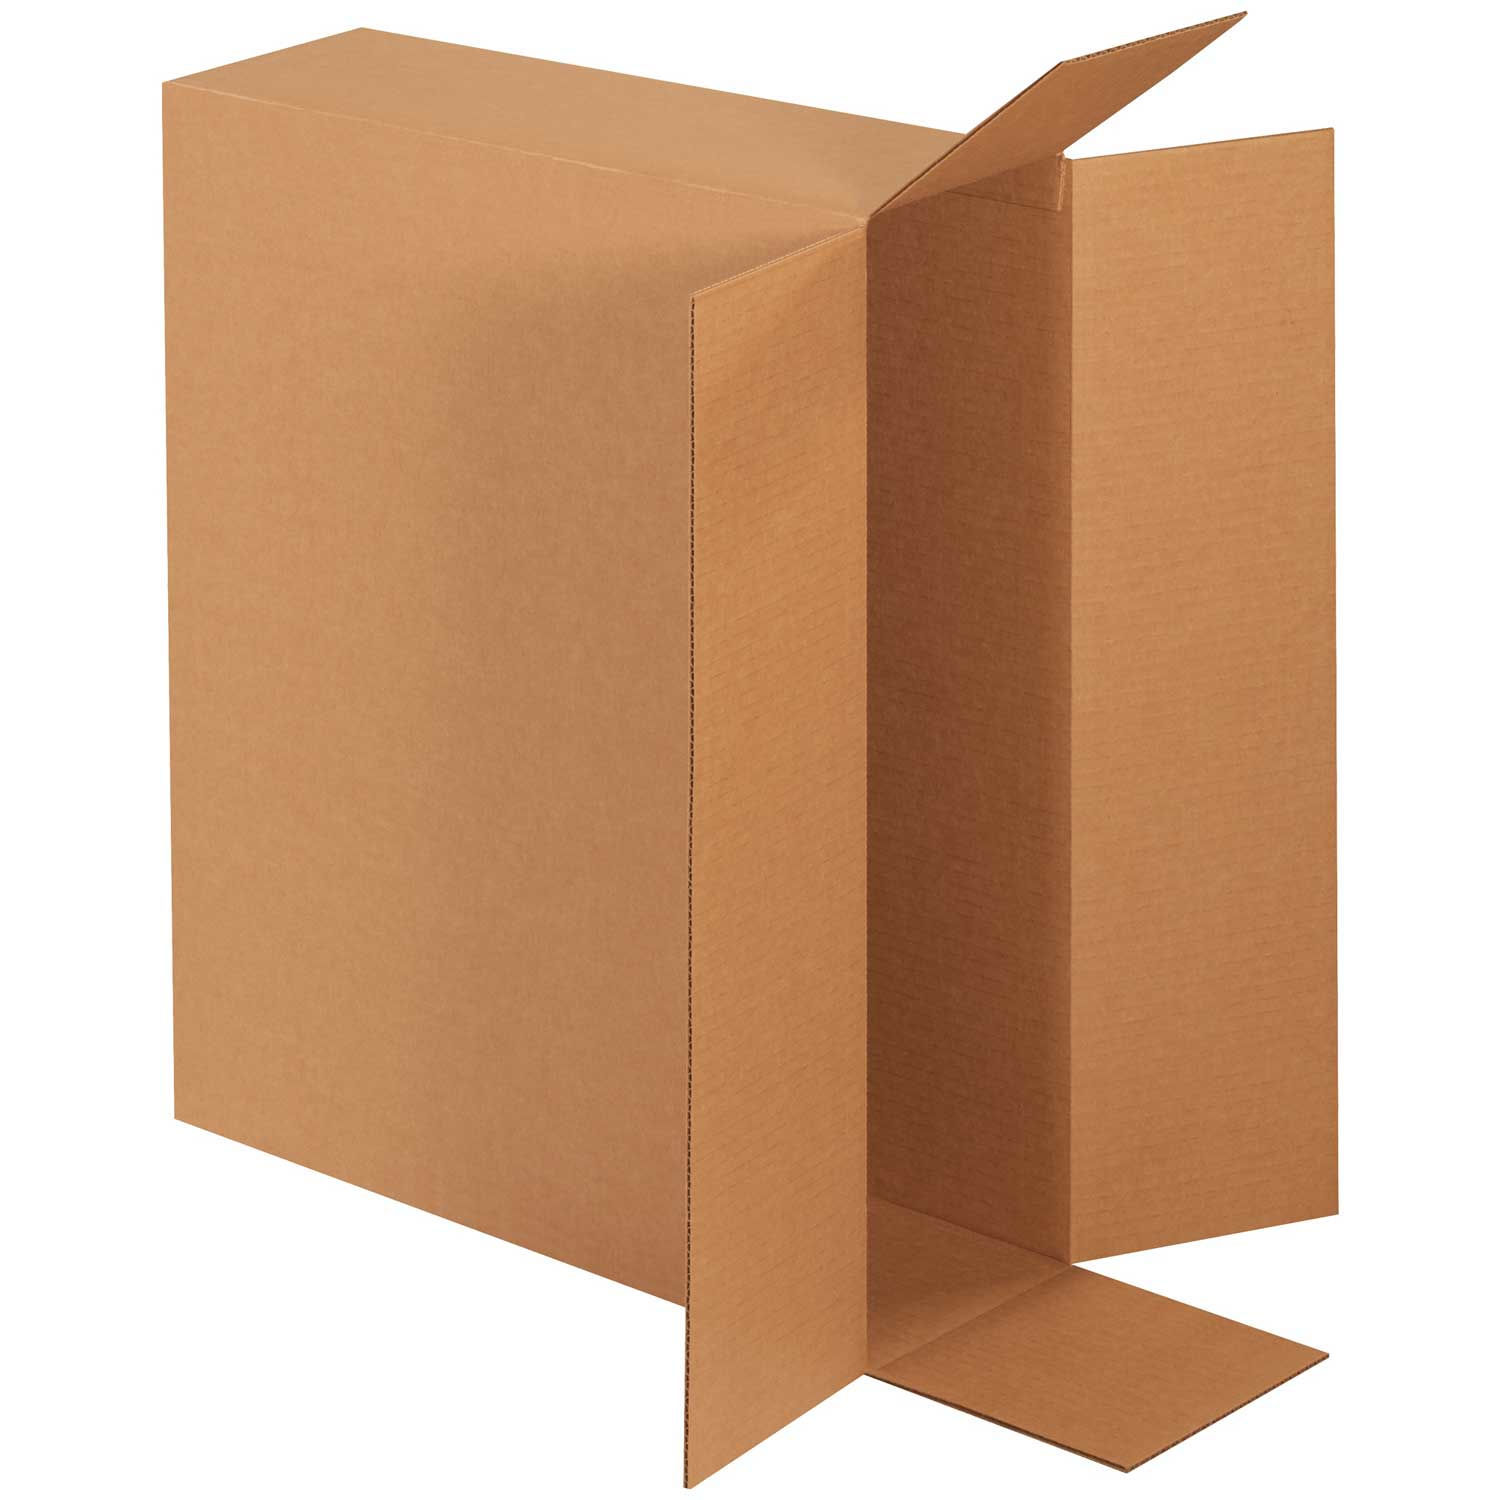 Lot of 10" x 10" x 24" Tall Cardboard Corrugated Boxes ECT-32 65 lbs Capacity